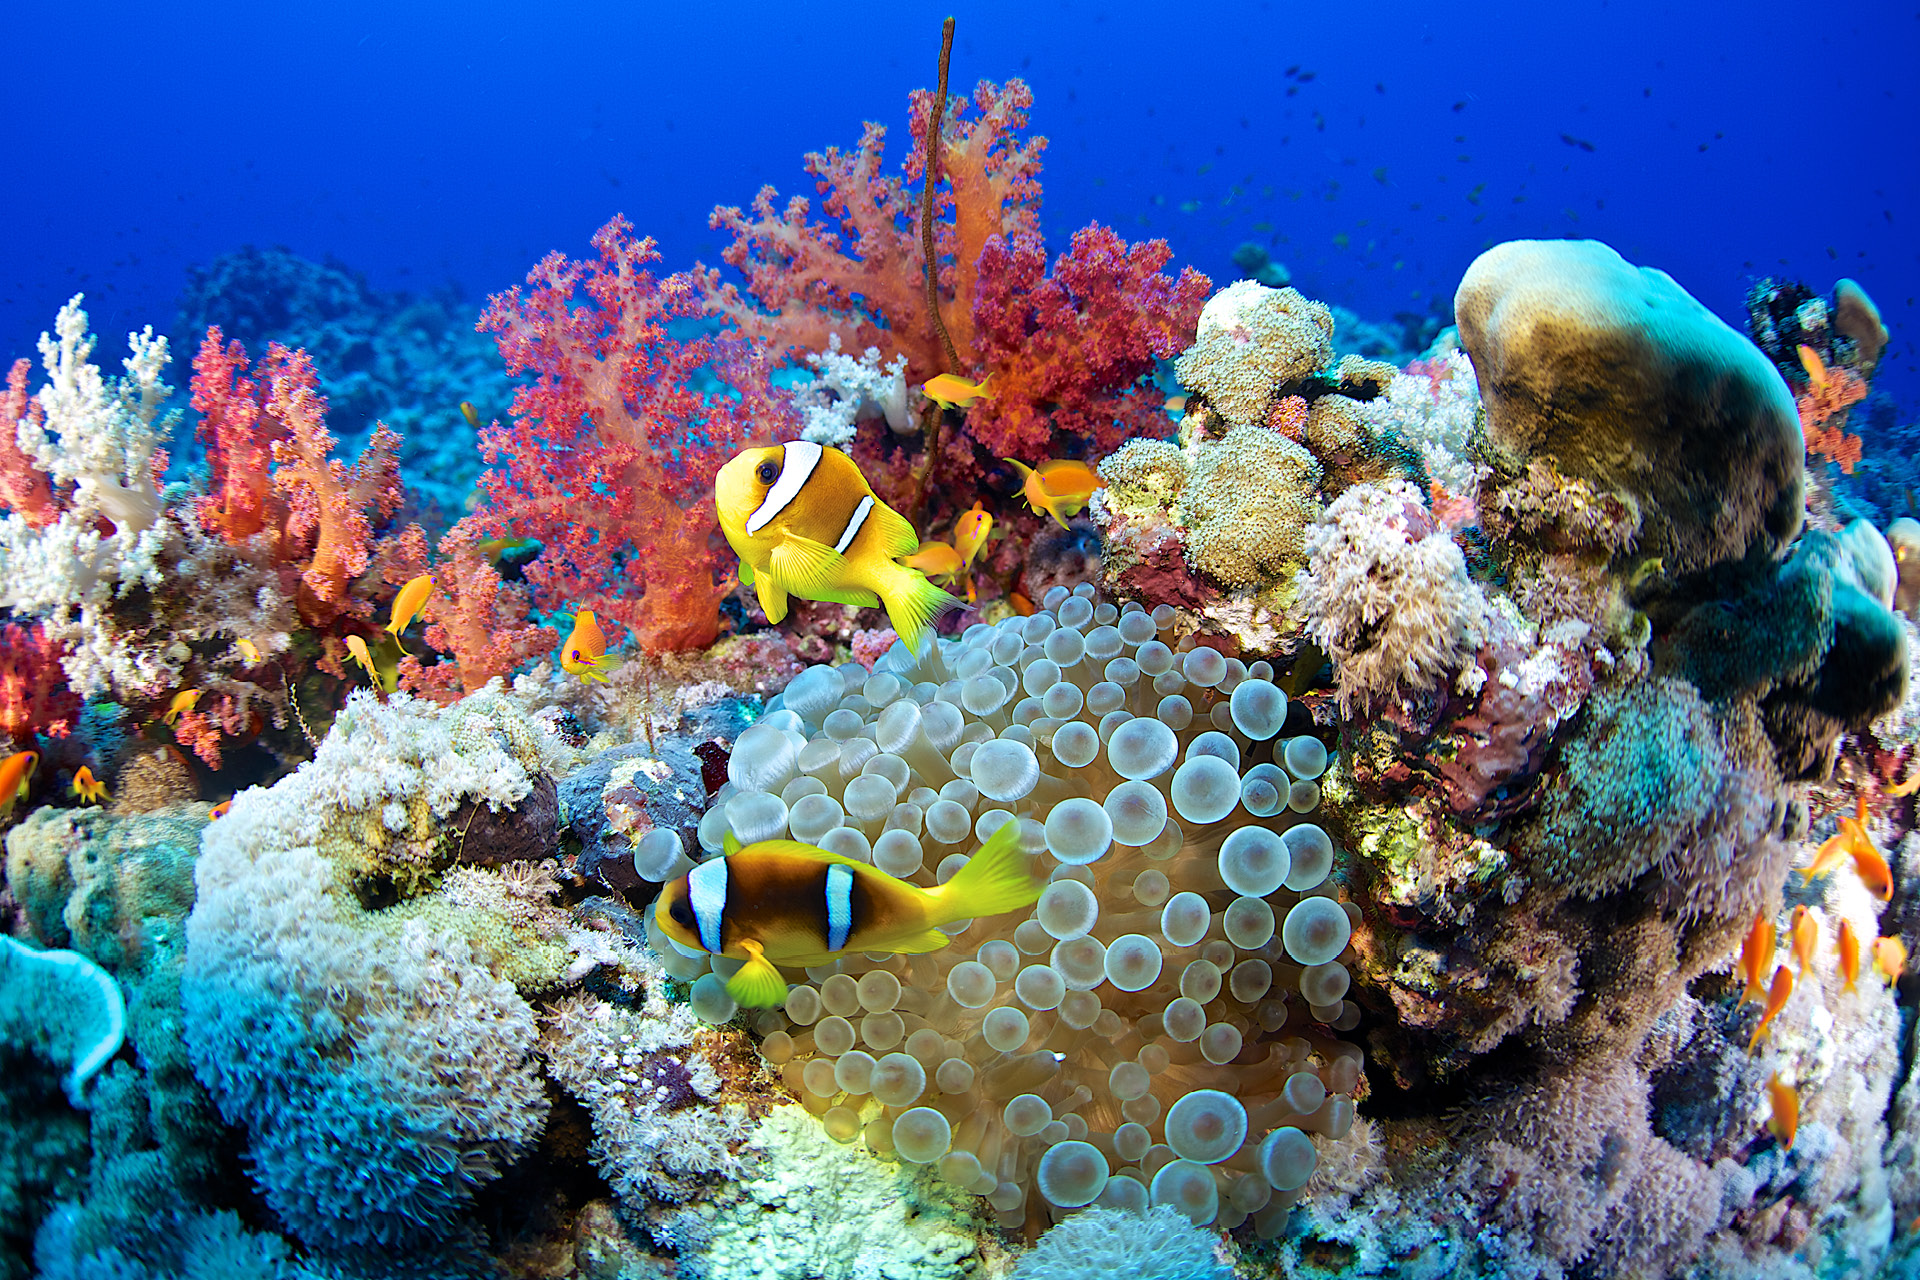 Why Your Next Outdoor Adventure Should Be to a Coral Reef